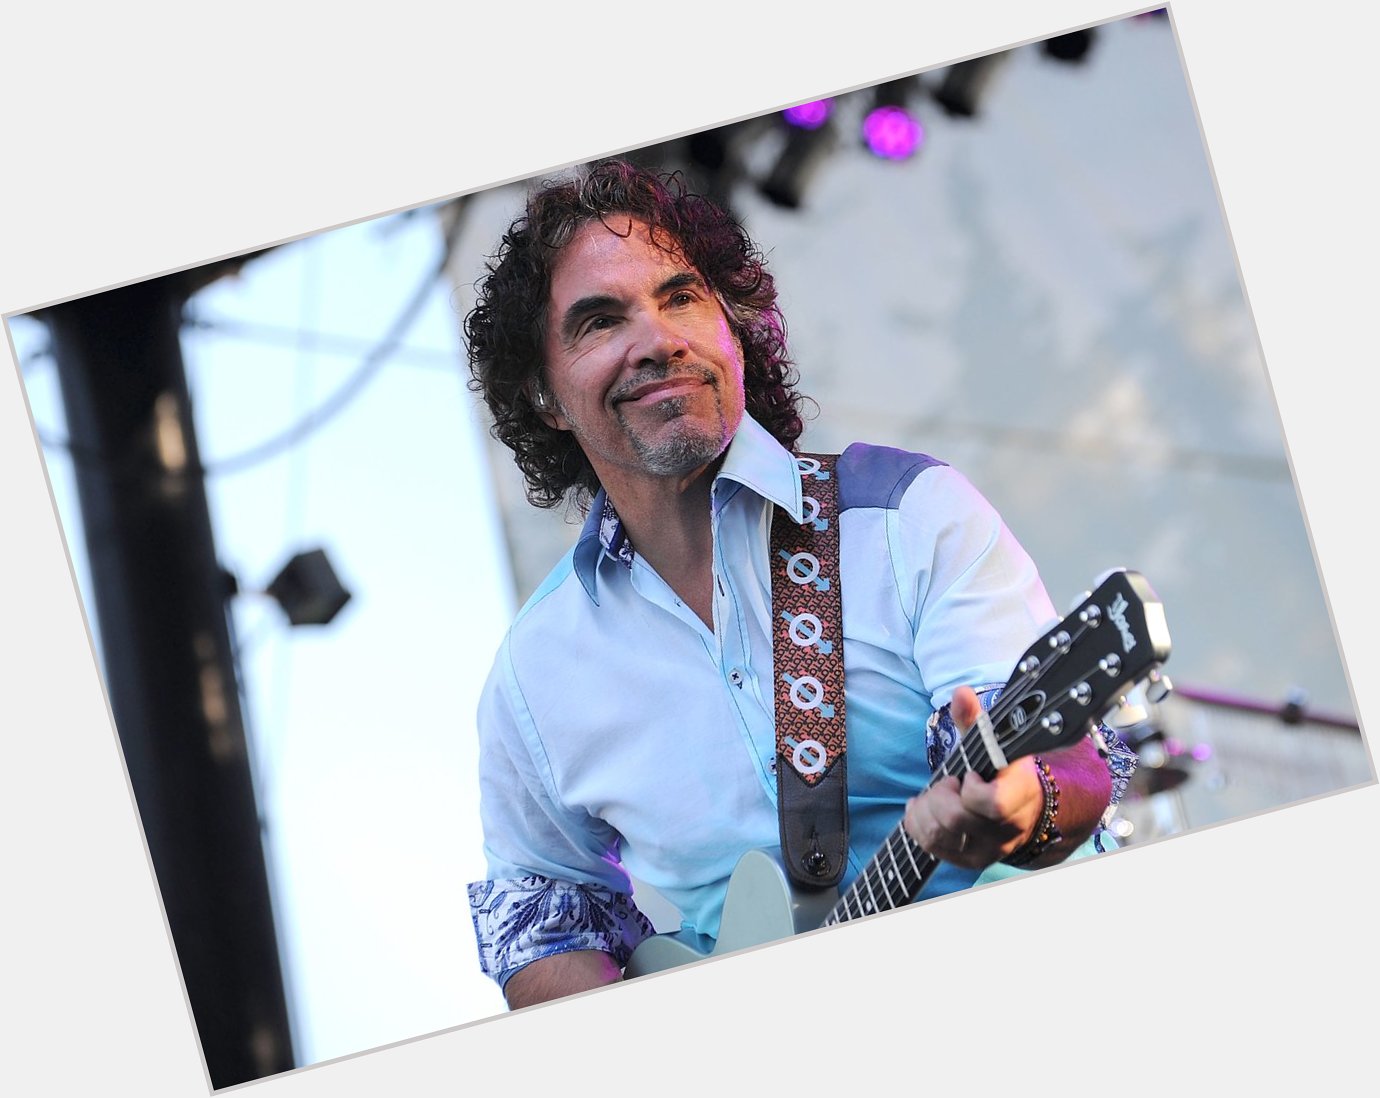 Please join me here at in wishing the one and only John Oates a very Happy 73rd Birthday today  